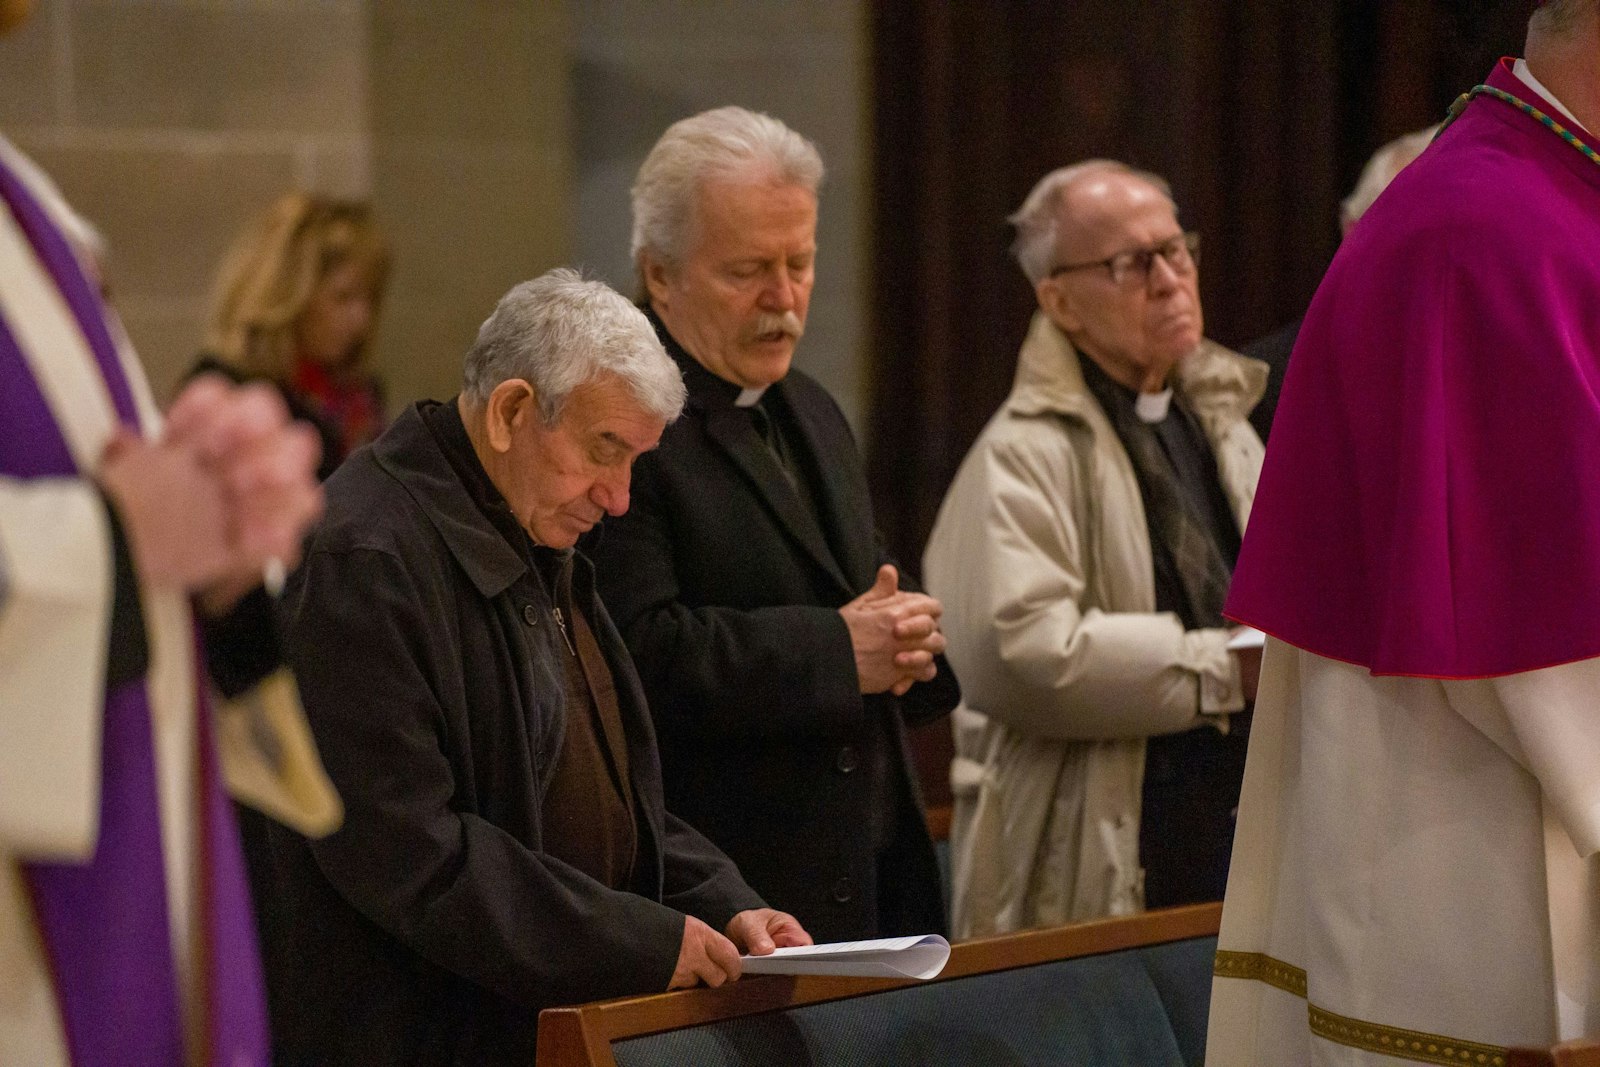 Priests of the Archdiocese of Detroit pray the consecration prayer along with the archbishop on March 25.